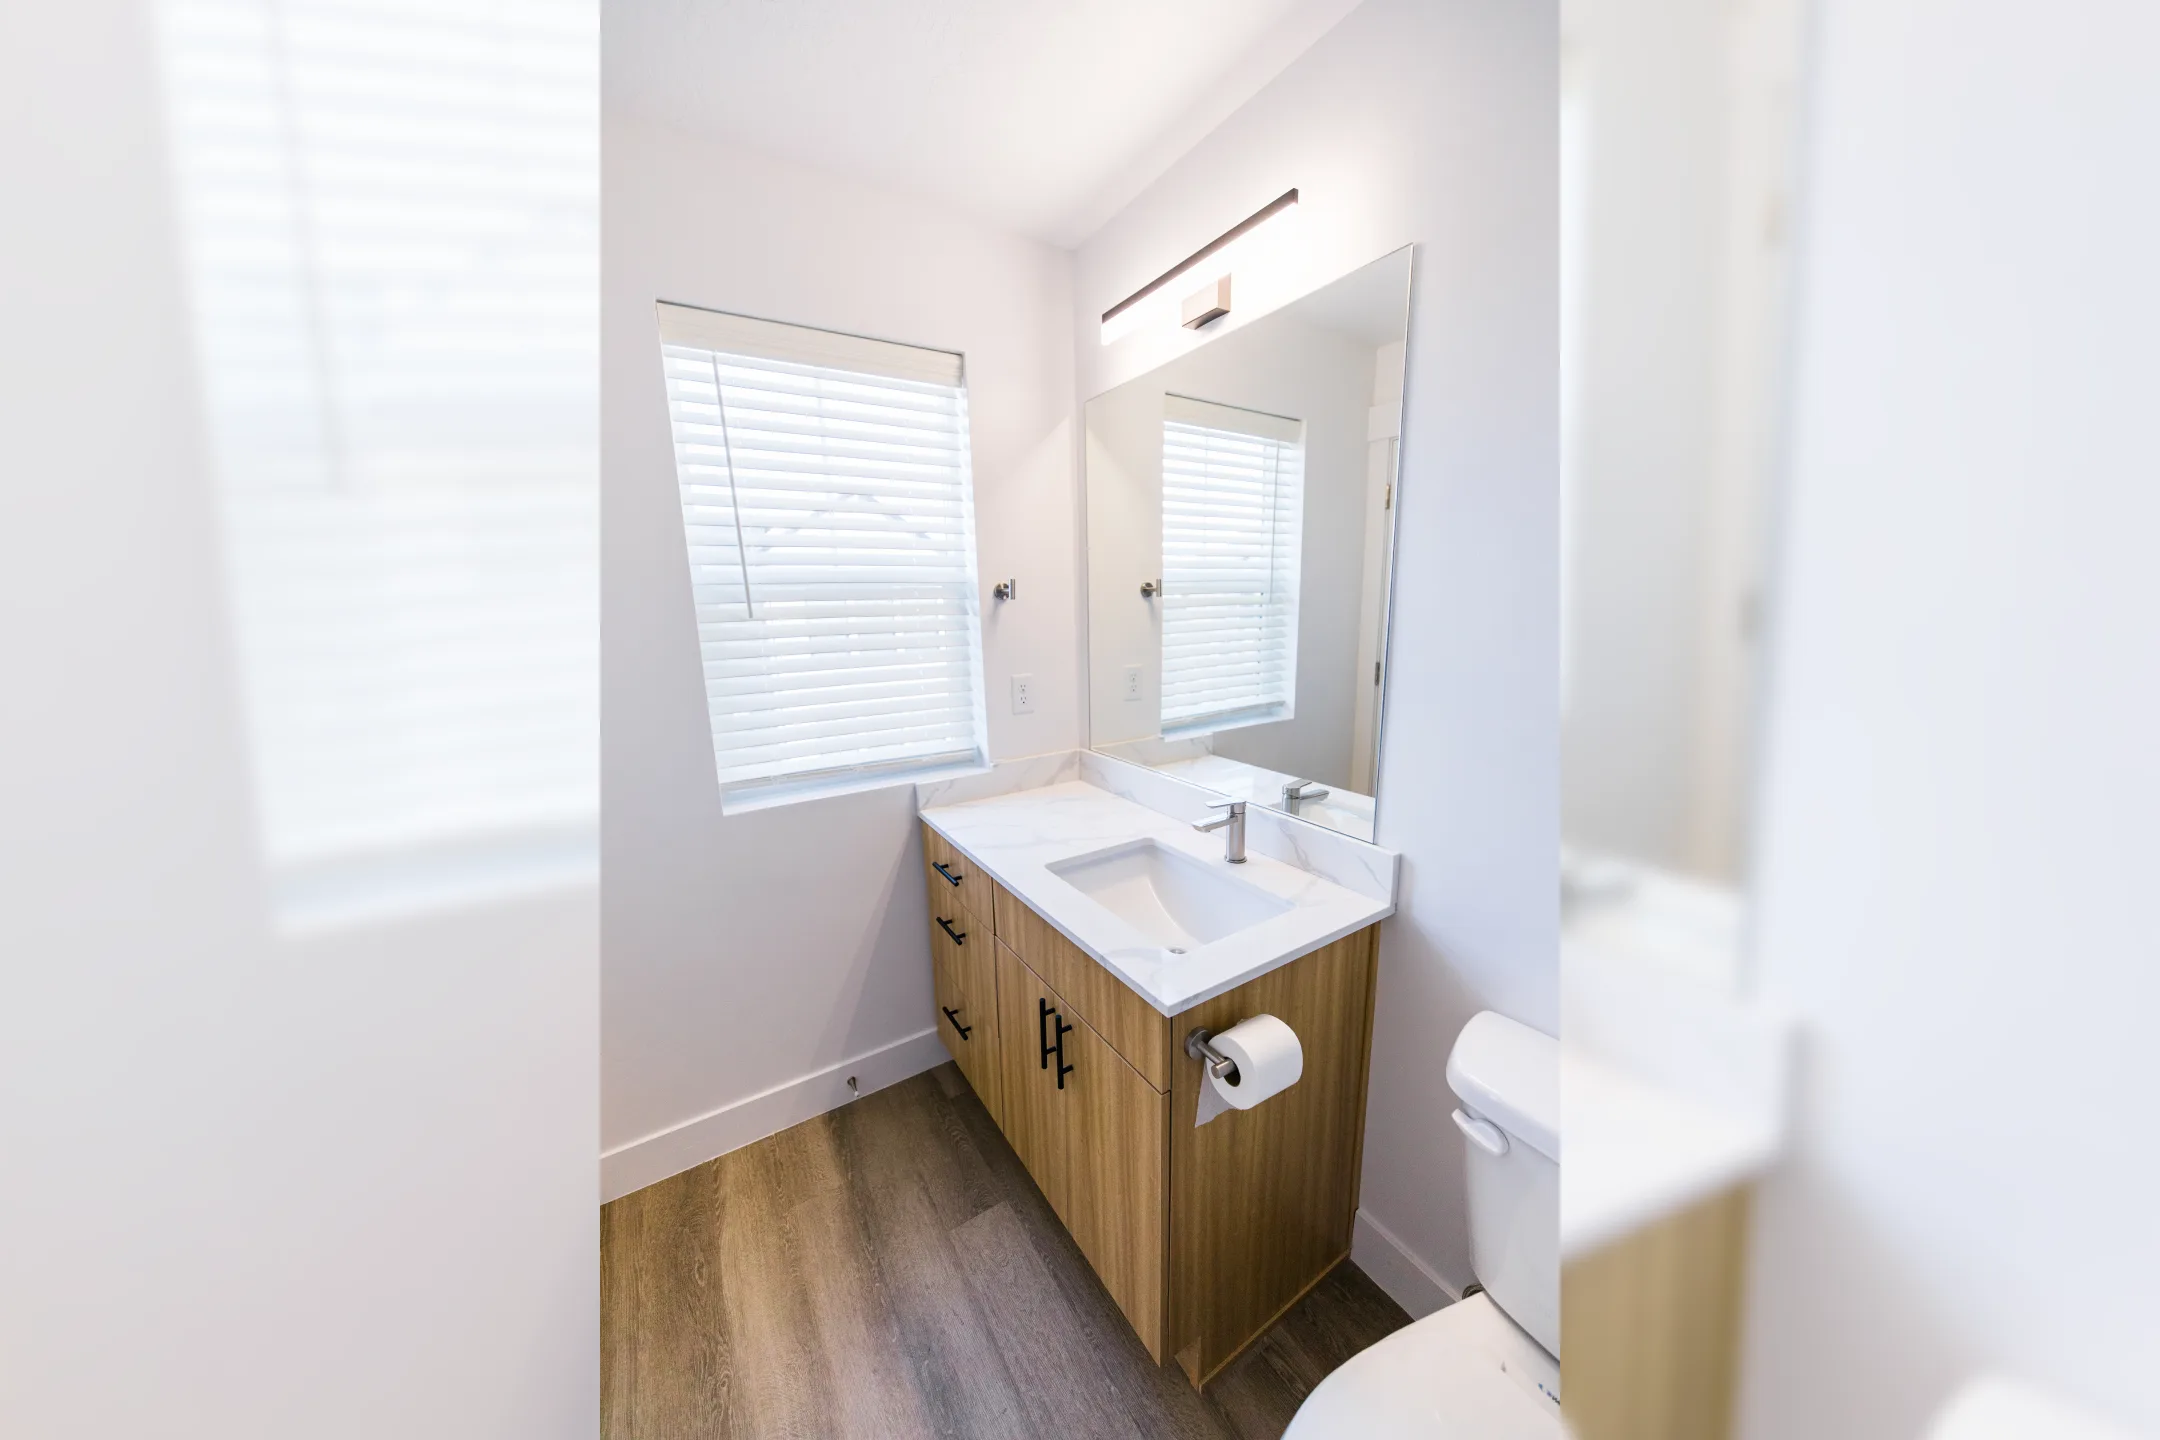 Bathroom - Current By Lotus Townhomes - Ogden, UT